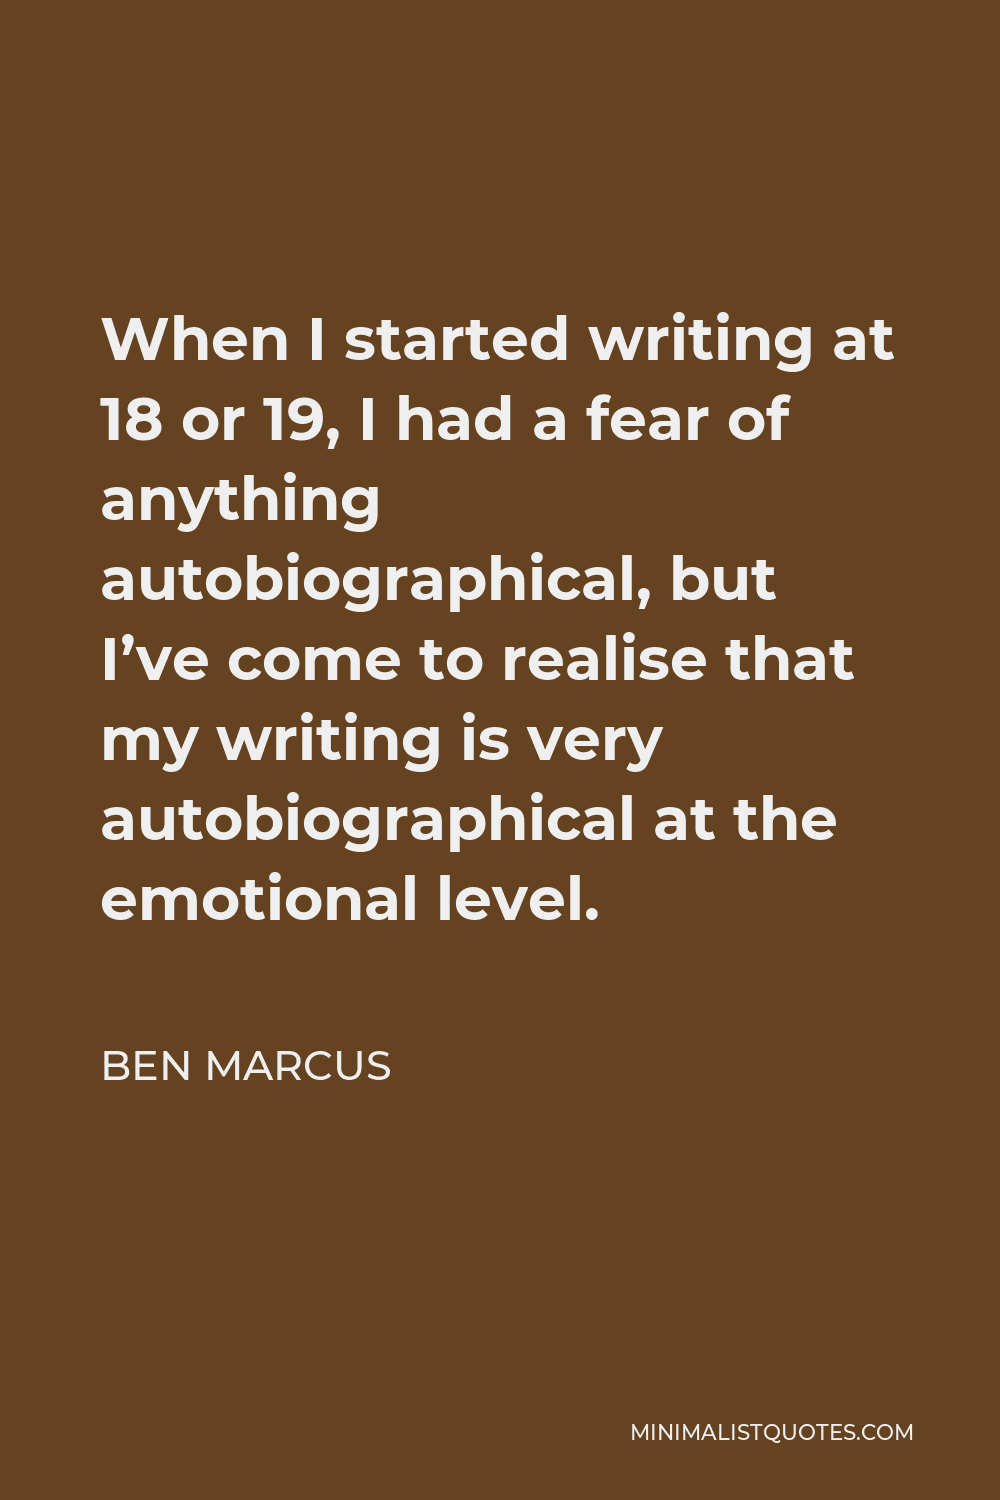 Ben Marcus Quote - When I started writing at 18 or 19, I had a fear of anything autobiographical, but I’ve come to realise that my writing is very autobiographical at the emotional level.